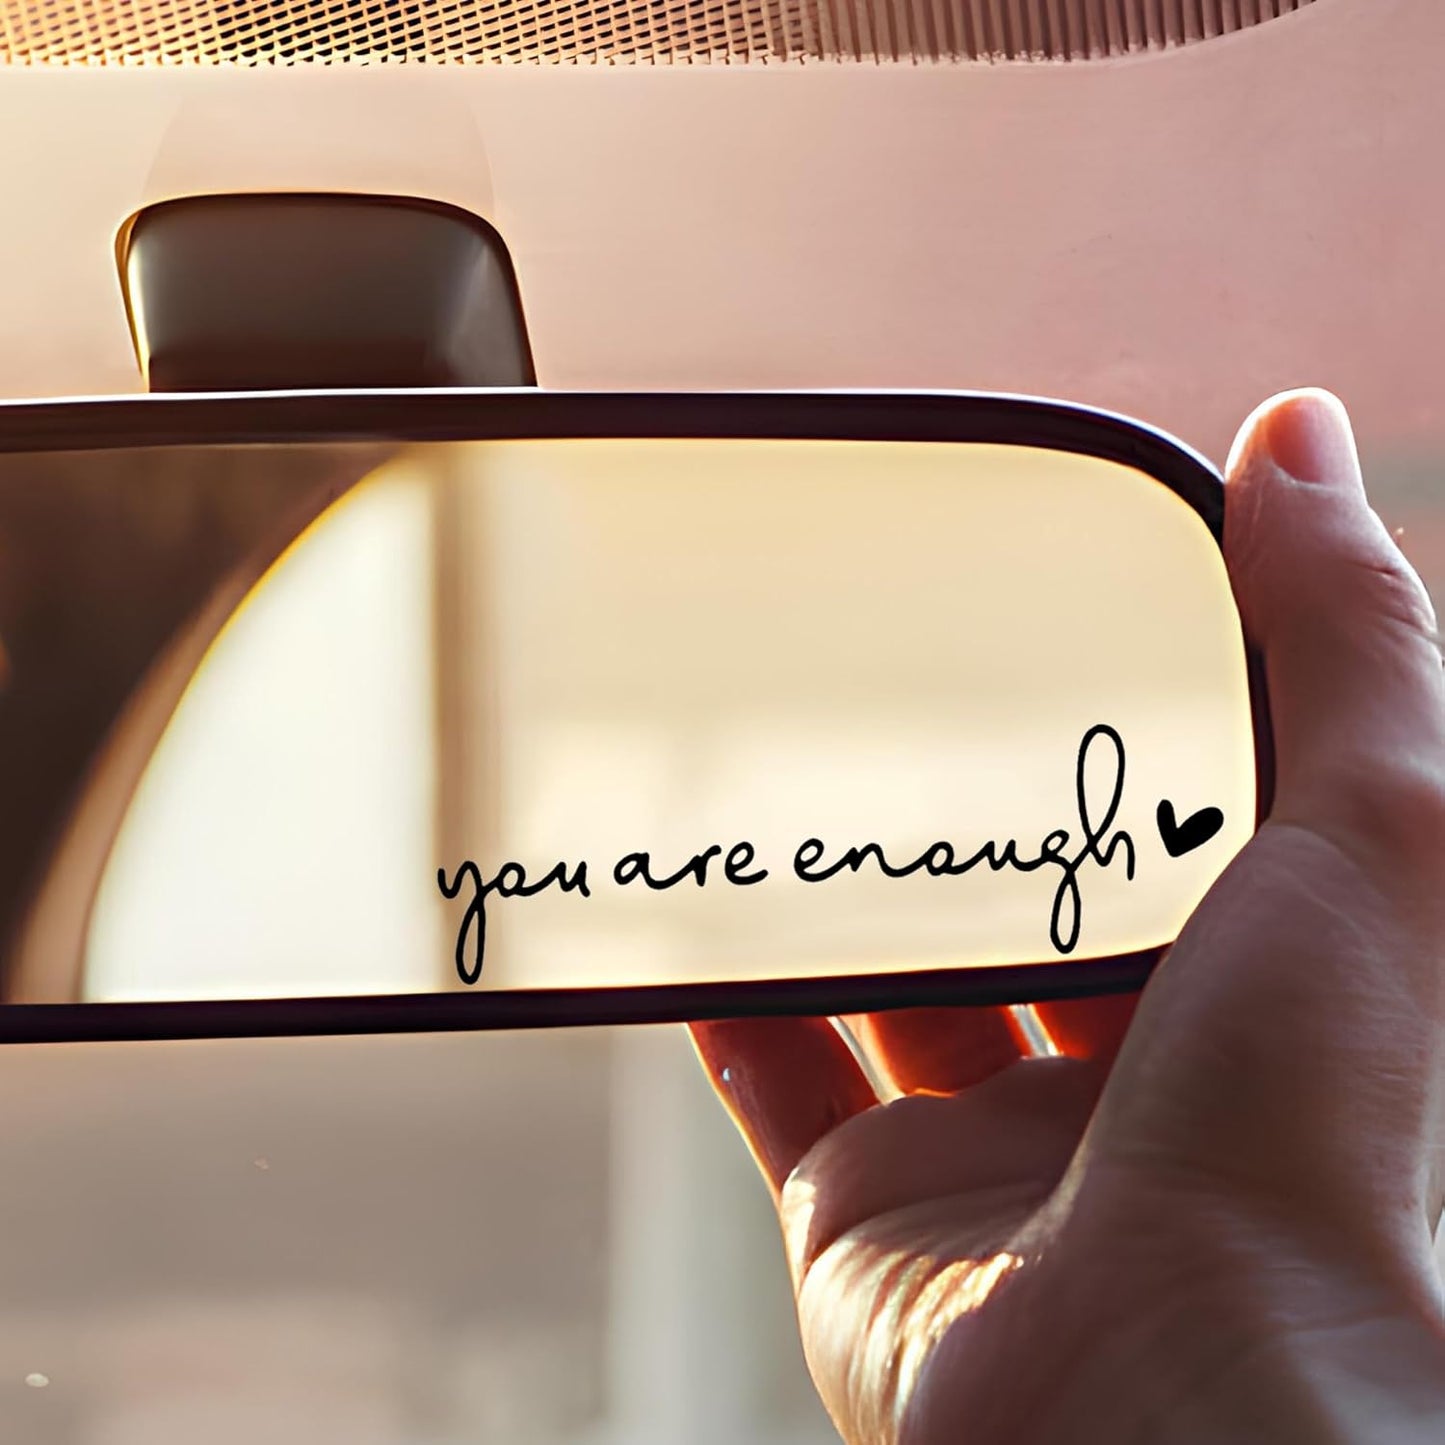 You are Enough Rearview Mirror Decal, Car Decals, Car Stickers, Car Stickers and Decals, Car Window Decals for Vehicles, Car Decals for Women, Car Window Stickers, Car Stickers for Women